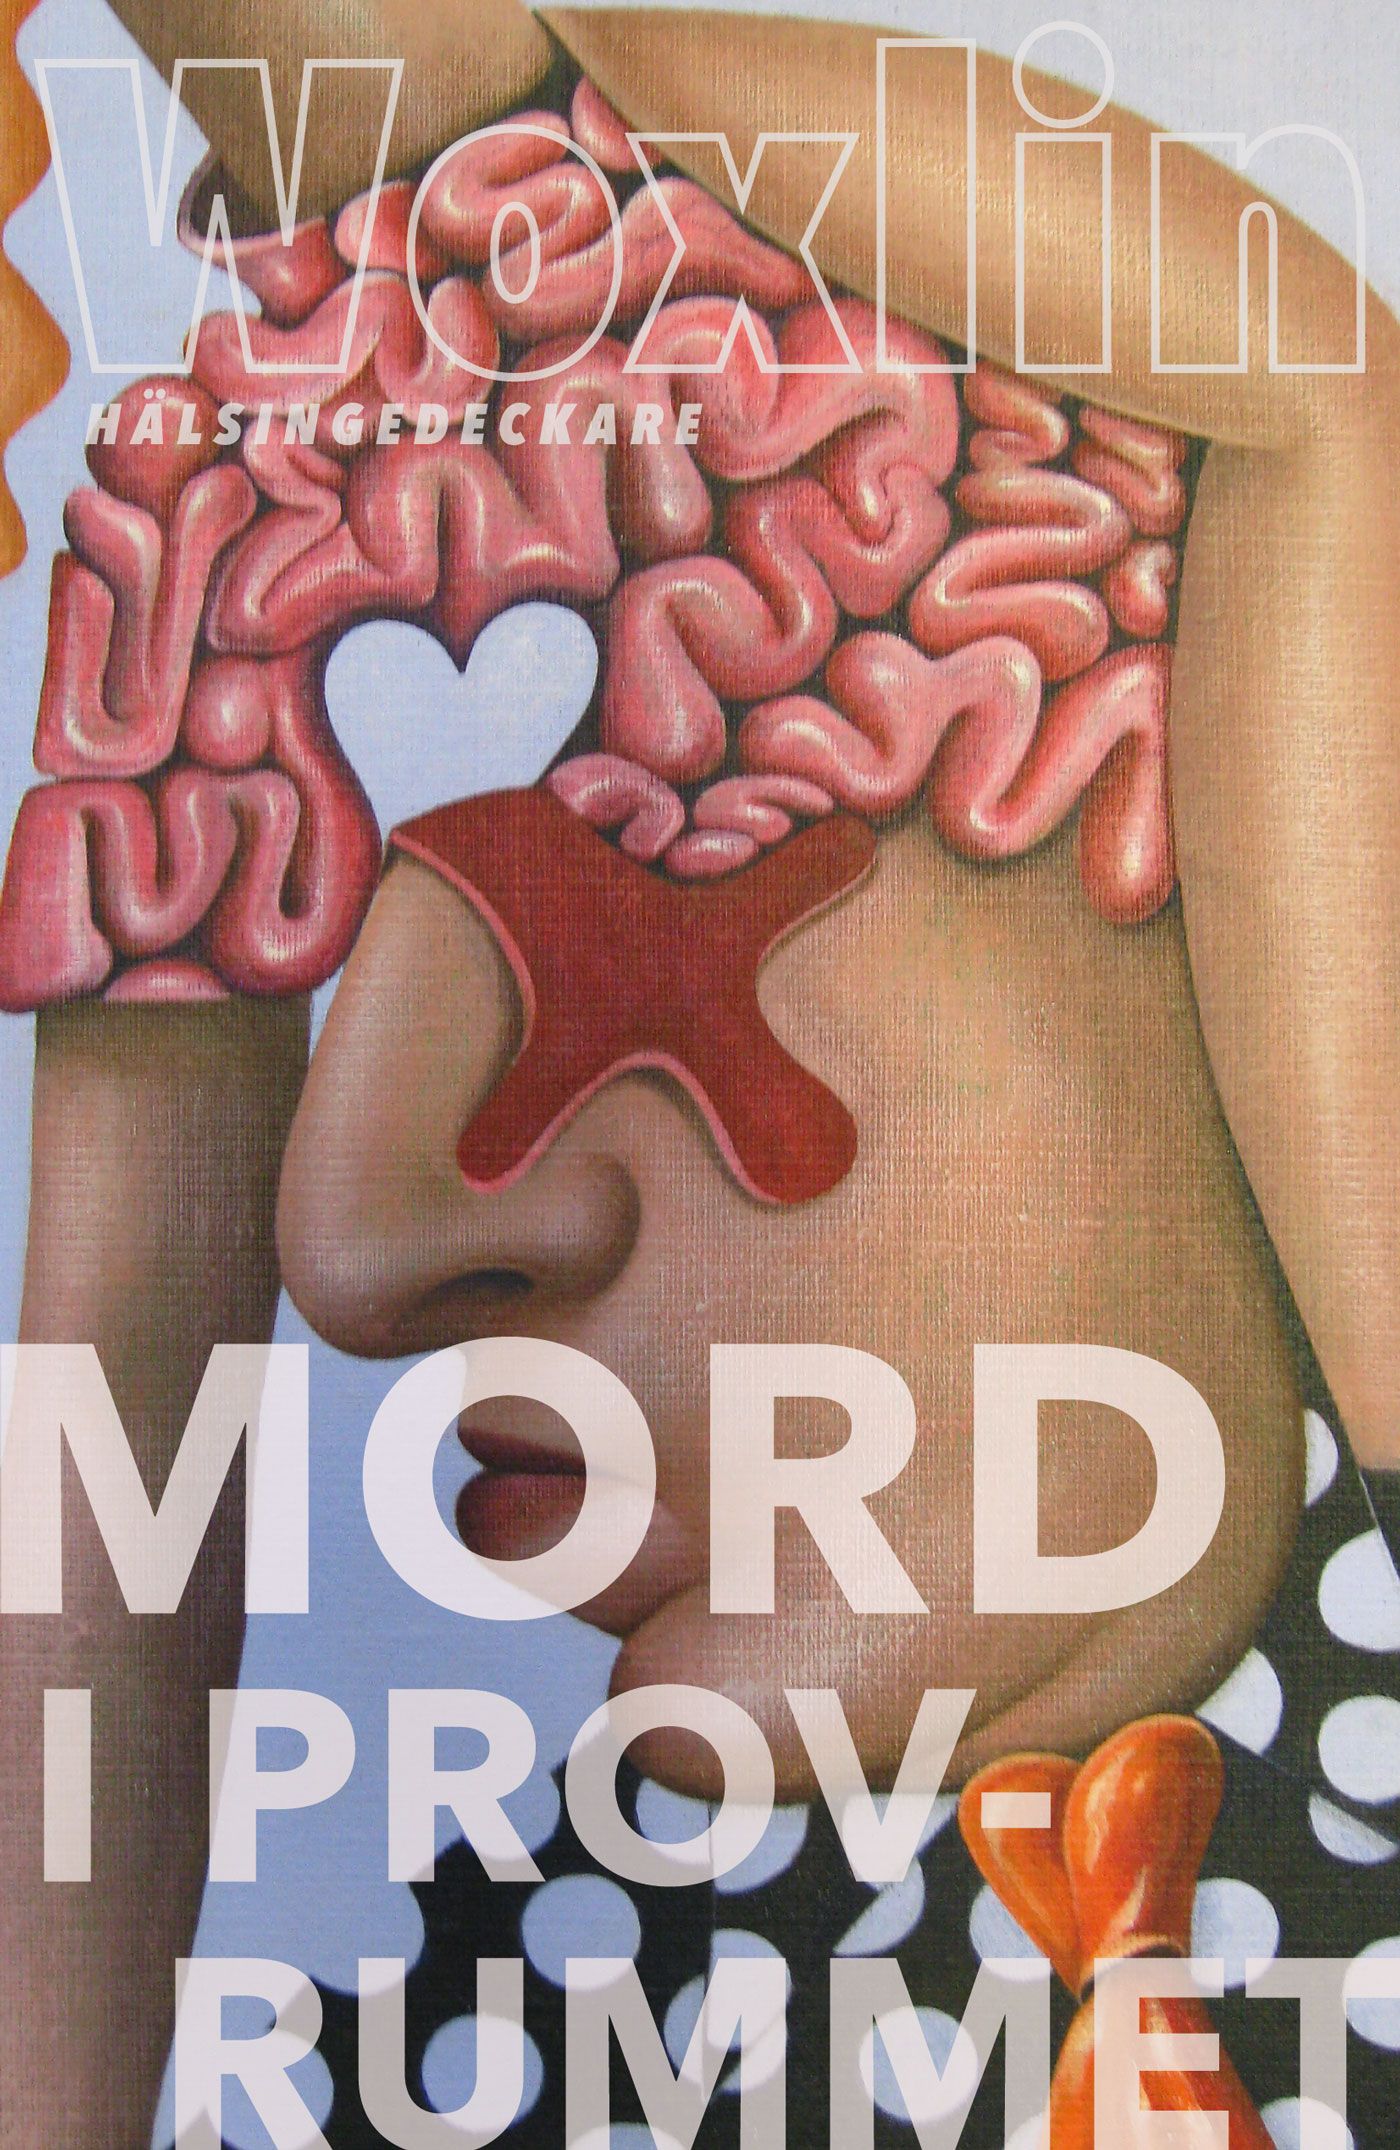 Mord i provrummet, eBook by Leif Woxlin